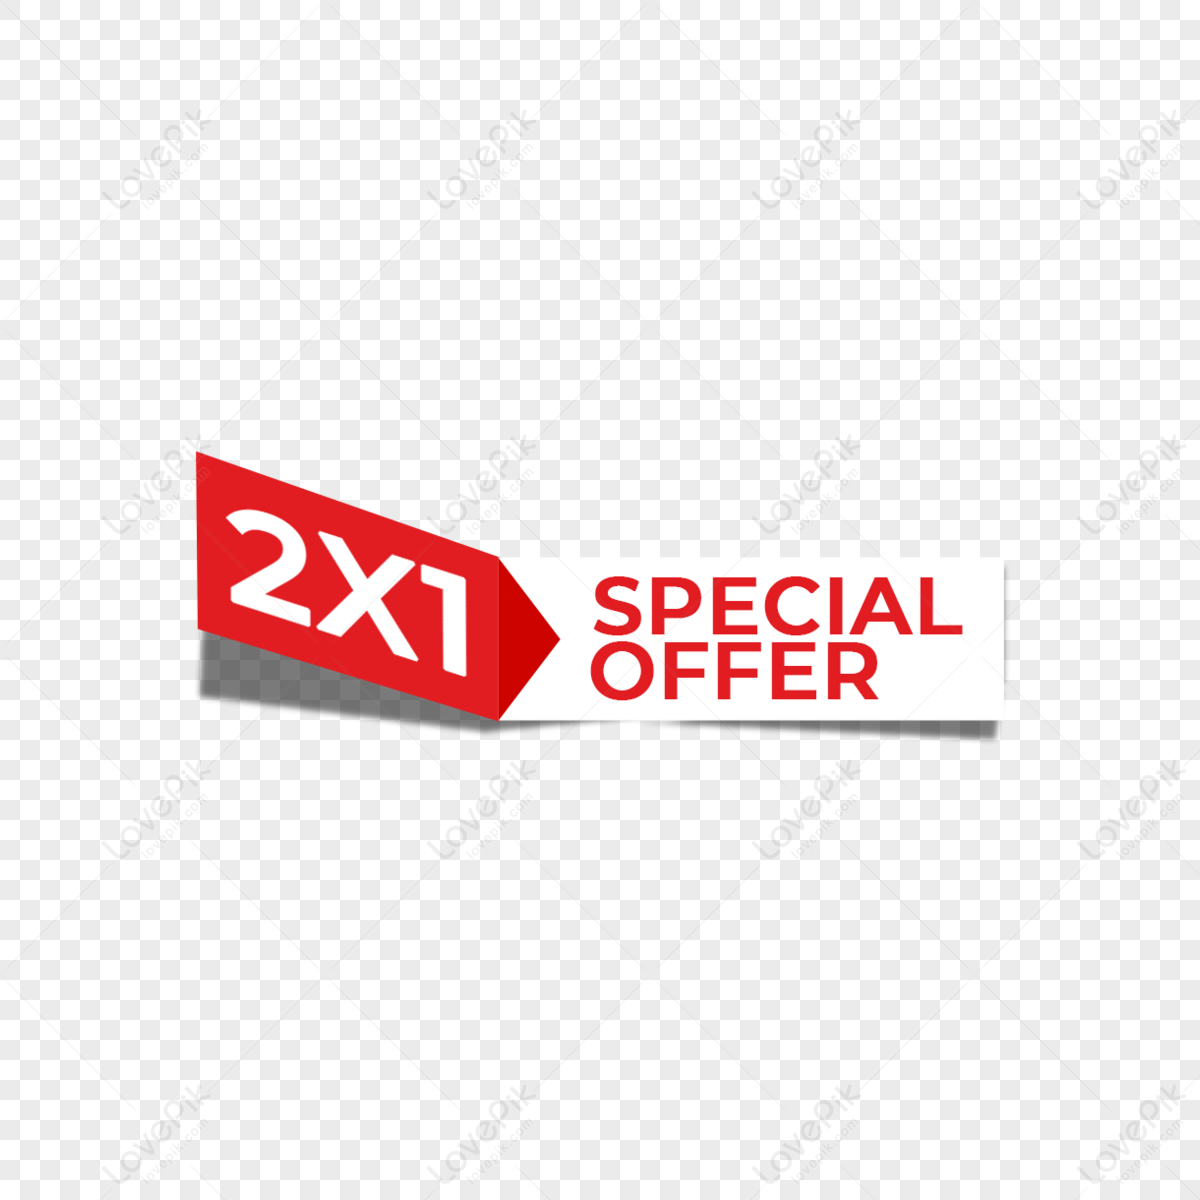 Special Offer Png - كونتنت